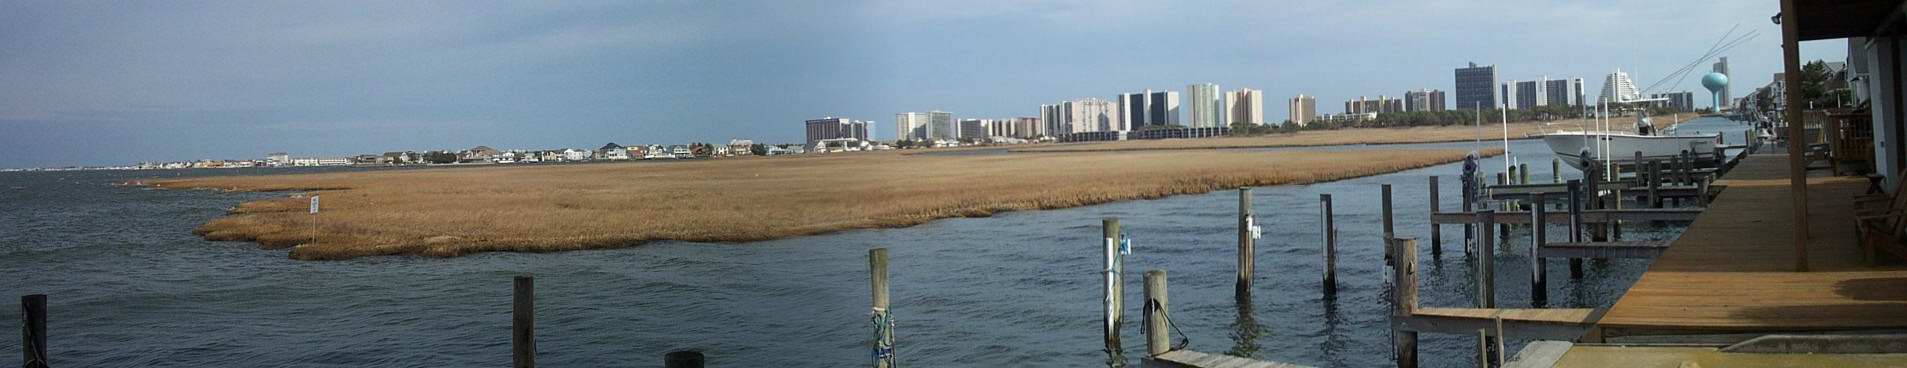 Bay side of Ocean City on the Eastern Shore of Maryland